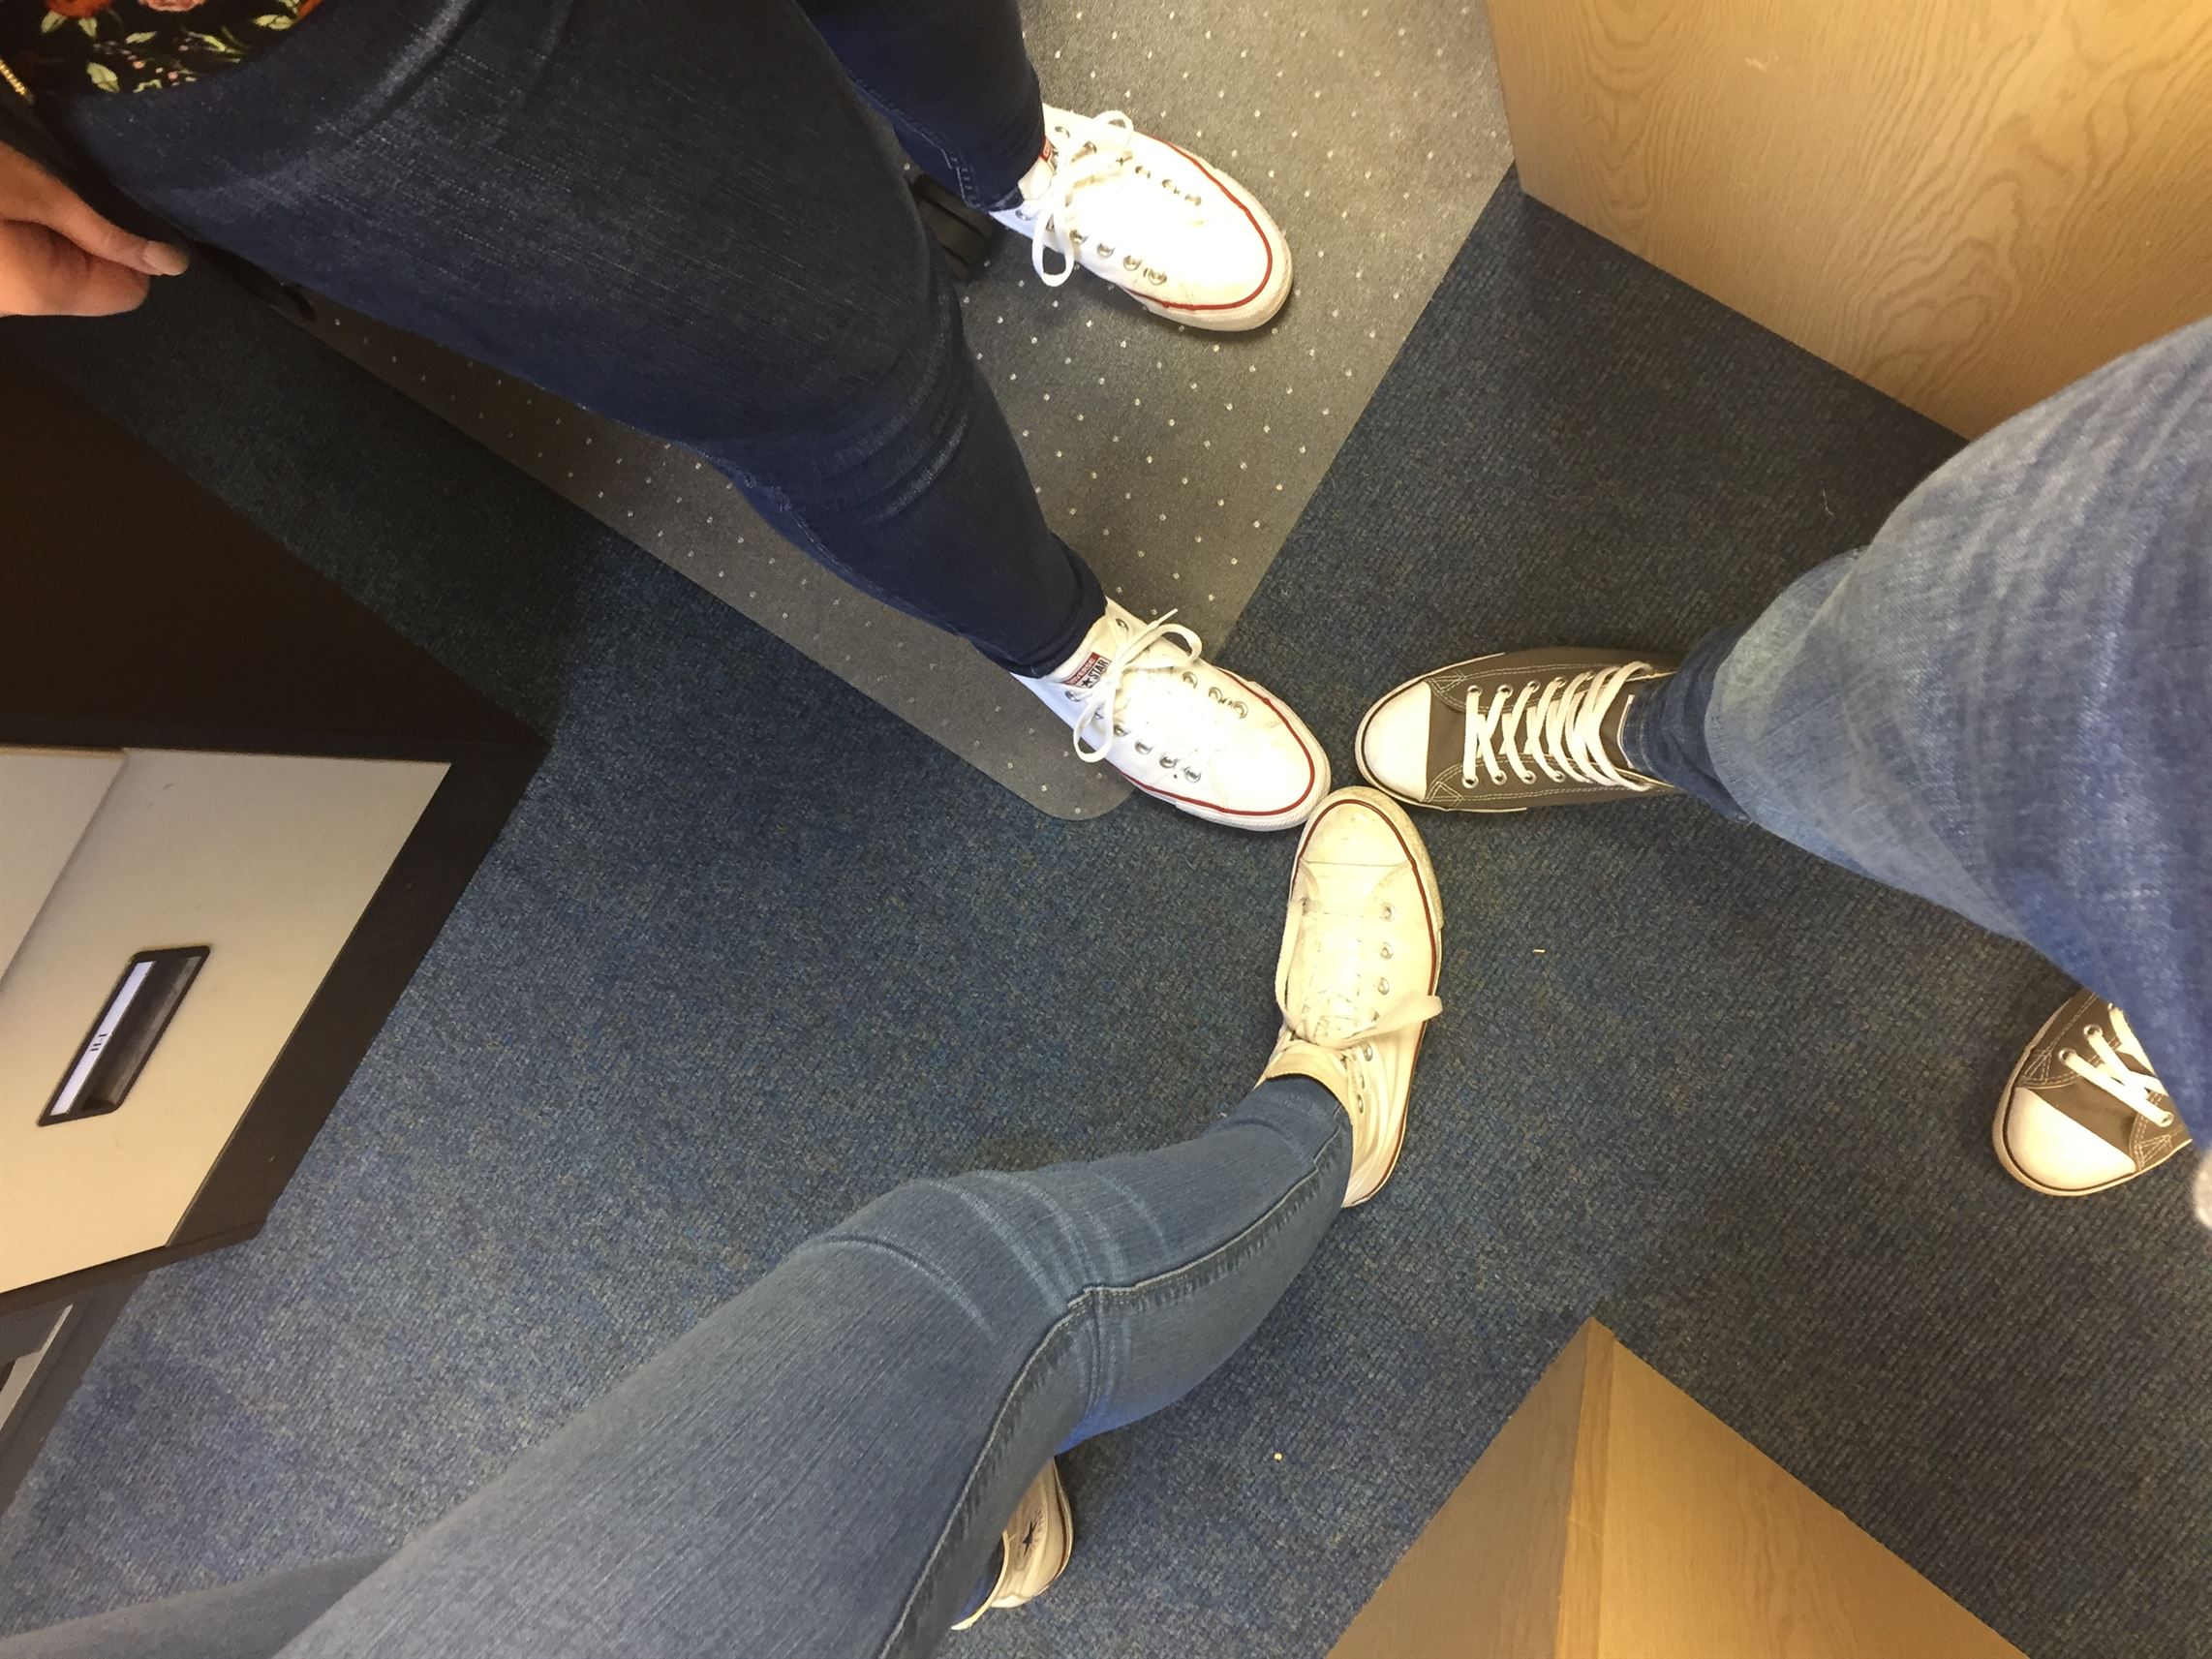 Jeans for Genes Day 